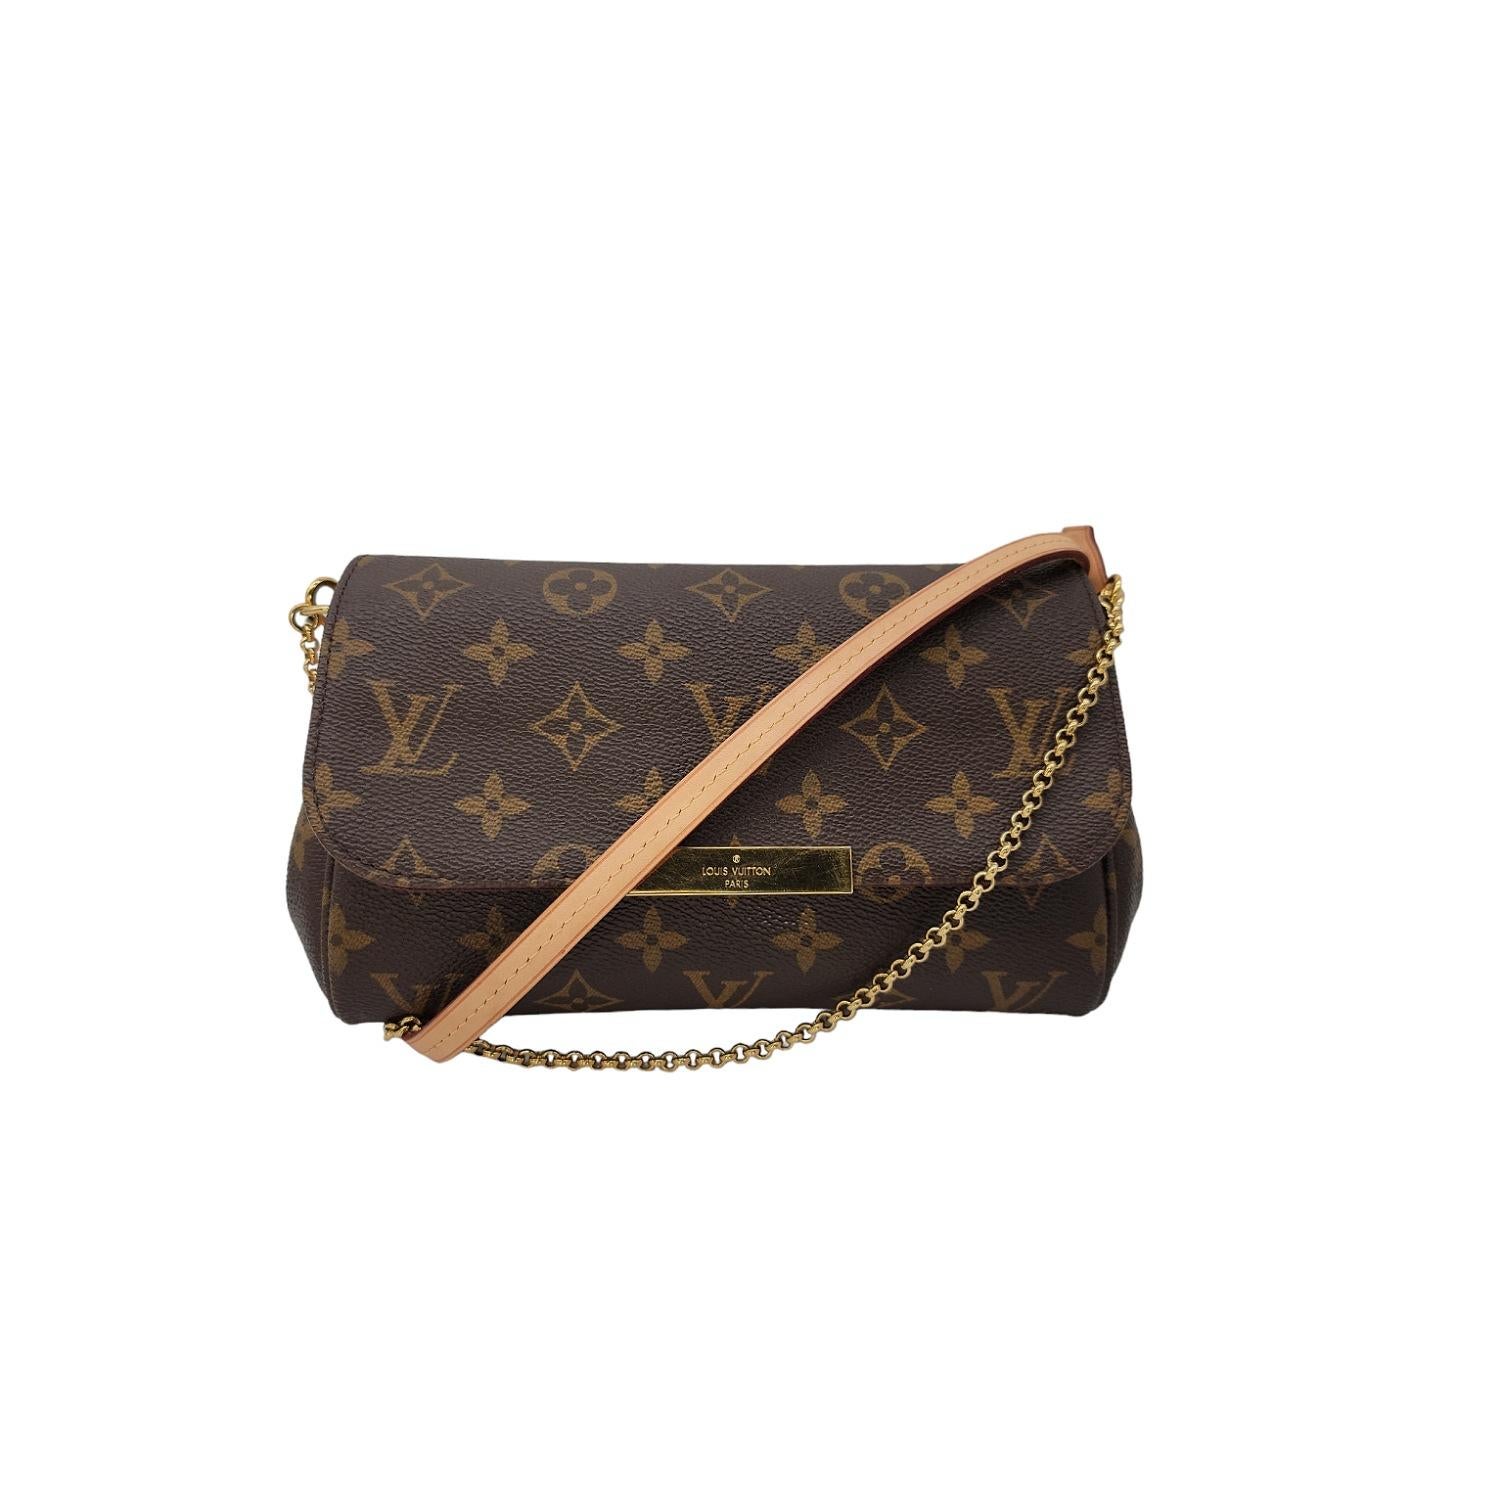 This stylish bag is crafted of a long and thin pouch of durable Monogrammed Louis Vuitton coated canvas with natural vachetta cowhide leather piping at the sides and trimmed with a frontal Louis Vuitton signature name plate in brass. This versatile